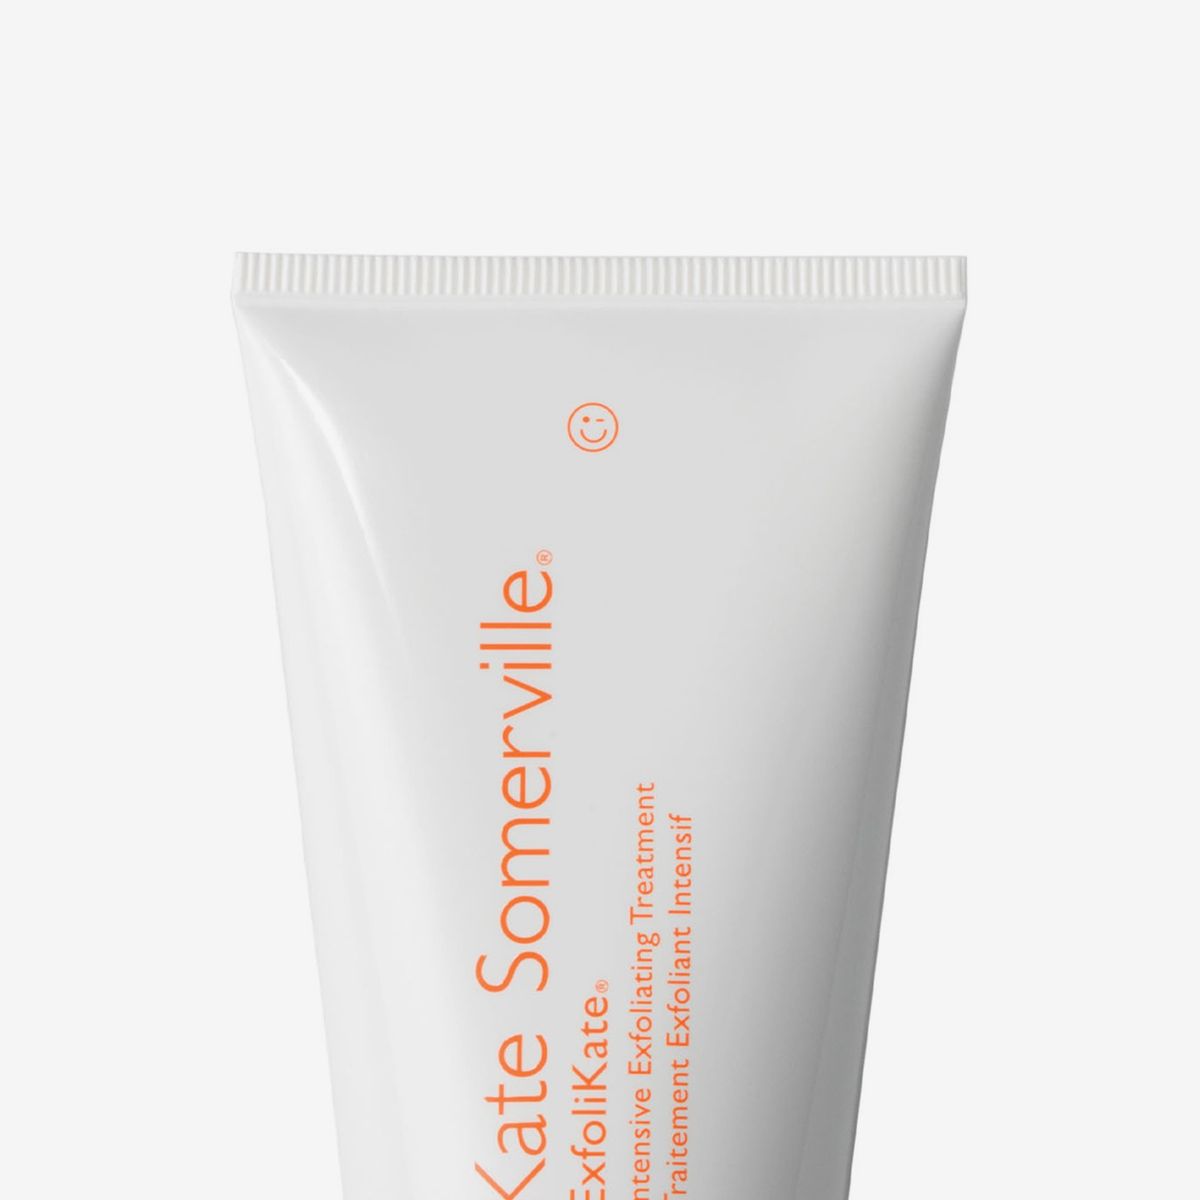 best face exfoliator to remove makeup